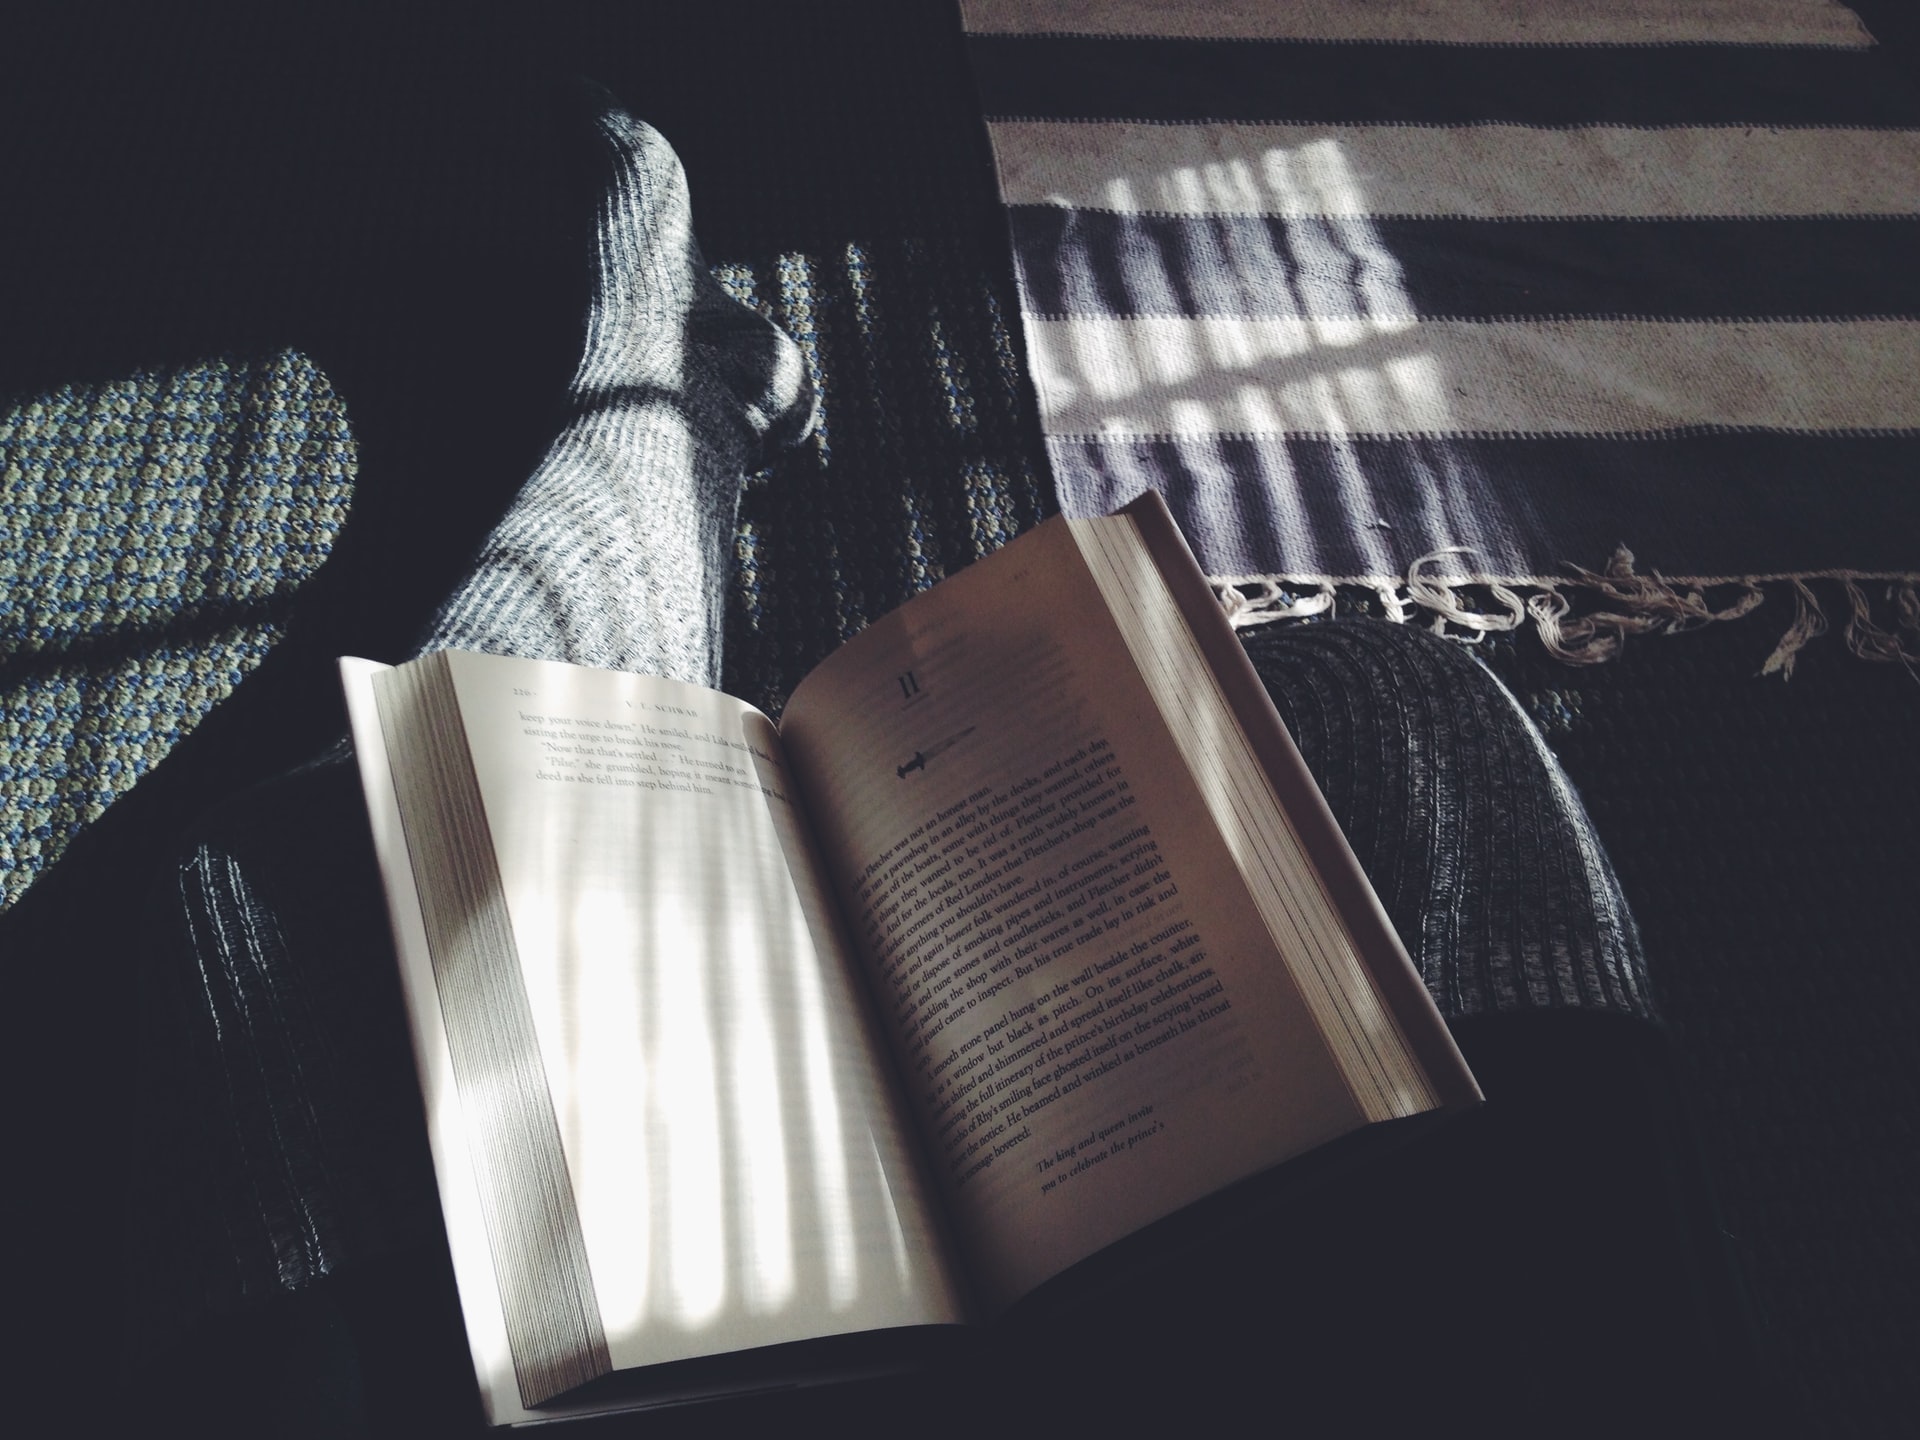 A person reading a book on the floor with a ray of sunshine coming in from a window